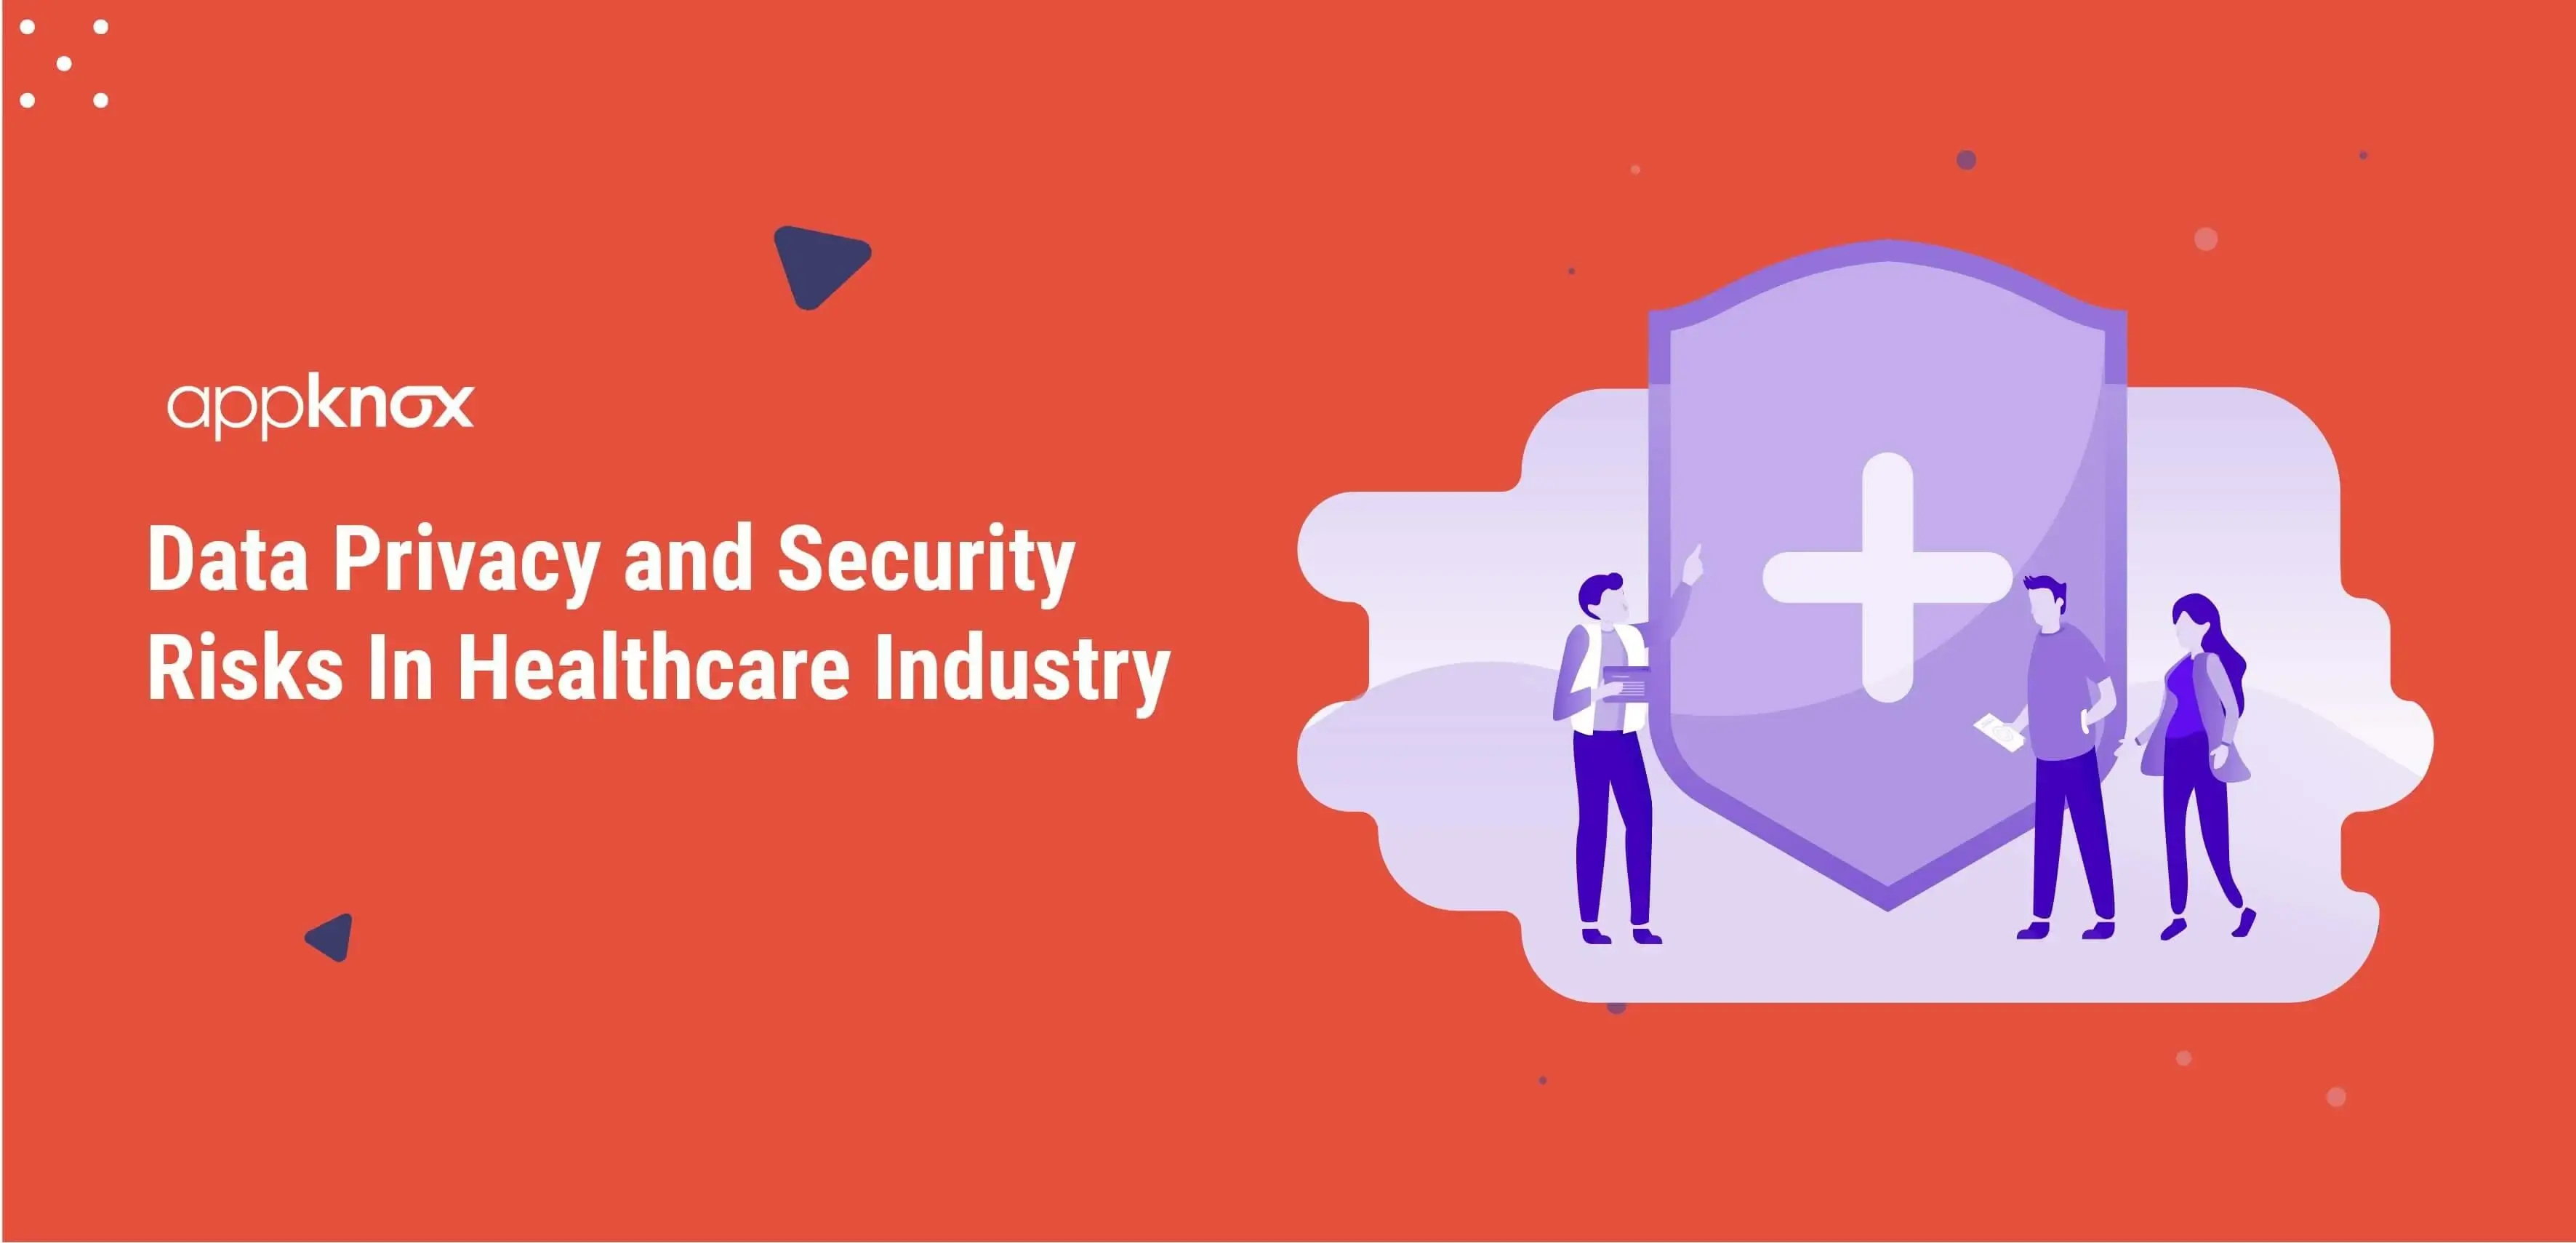 Data Privacy and Security Risks In Healthcare Industry